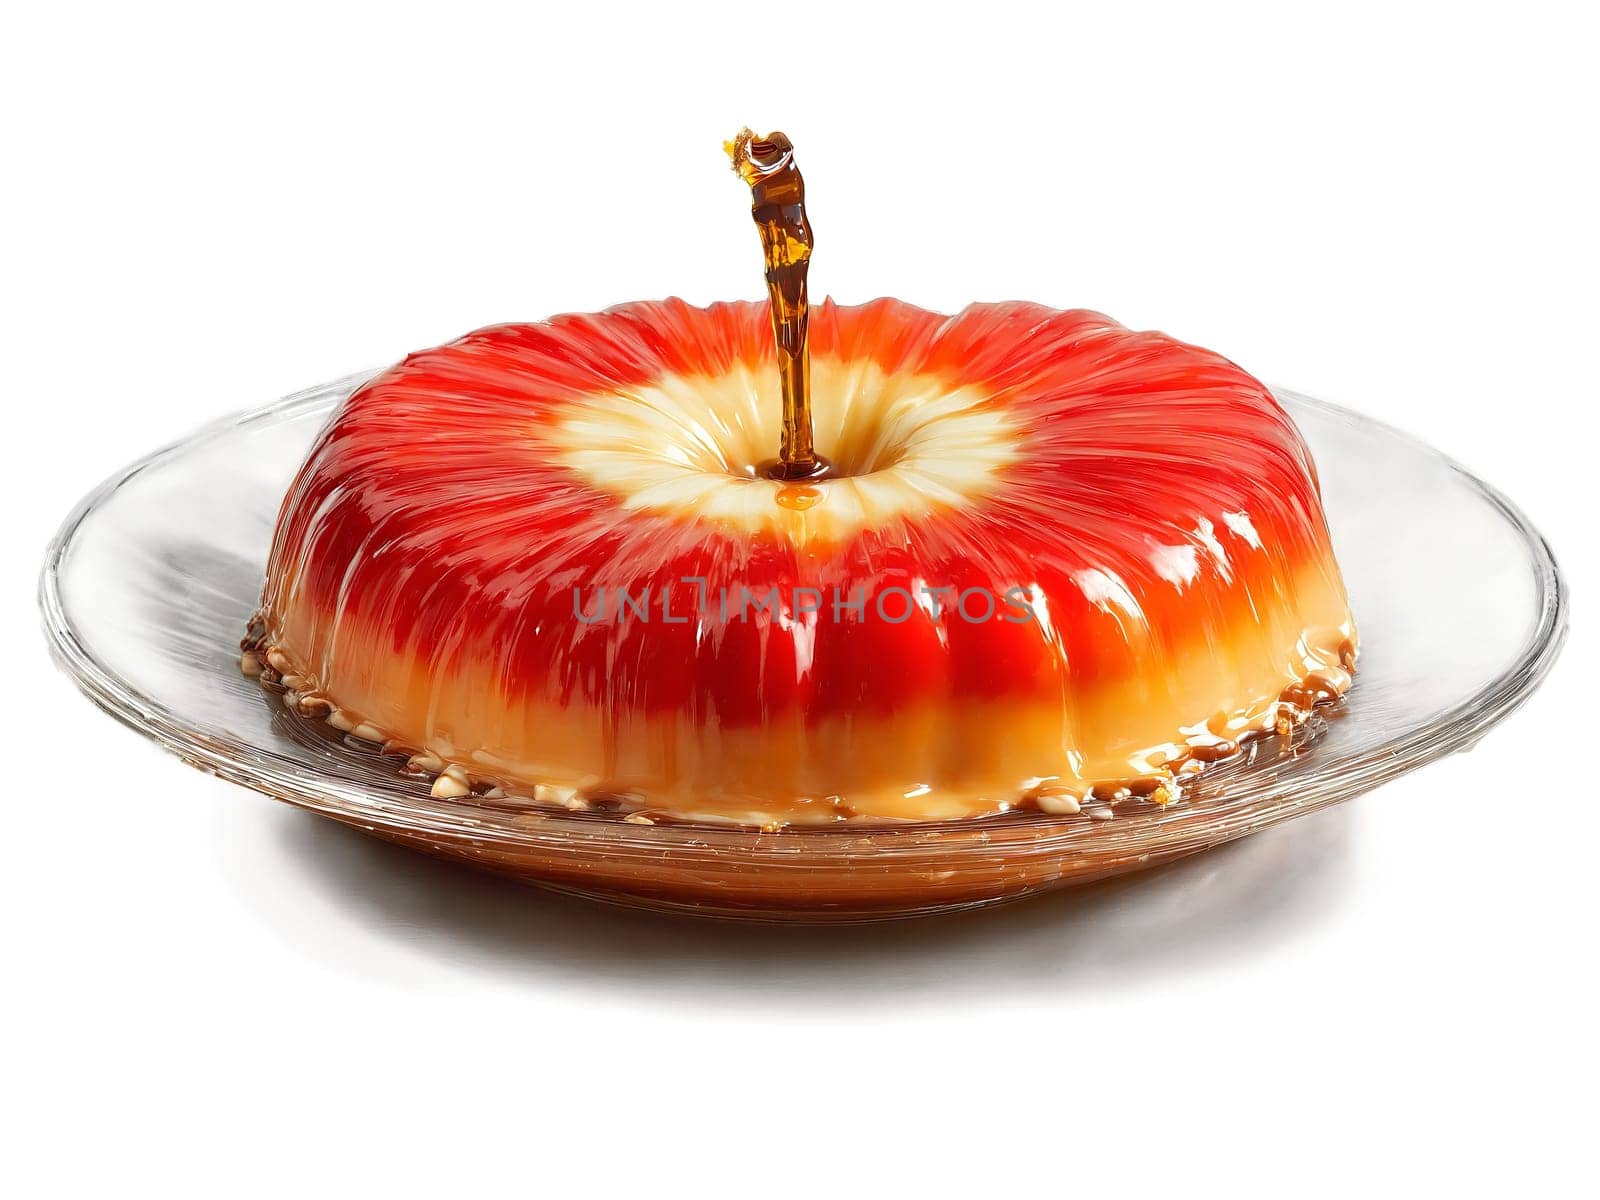 Halloween snack candy apple slices and caramel dip served on a transparent glass dish festive. Food isolated on transparent background.